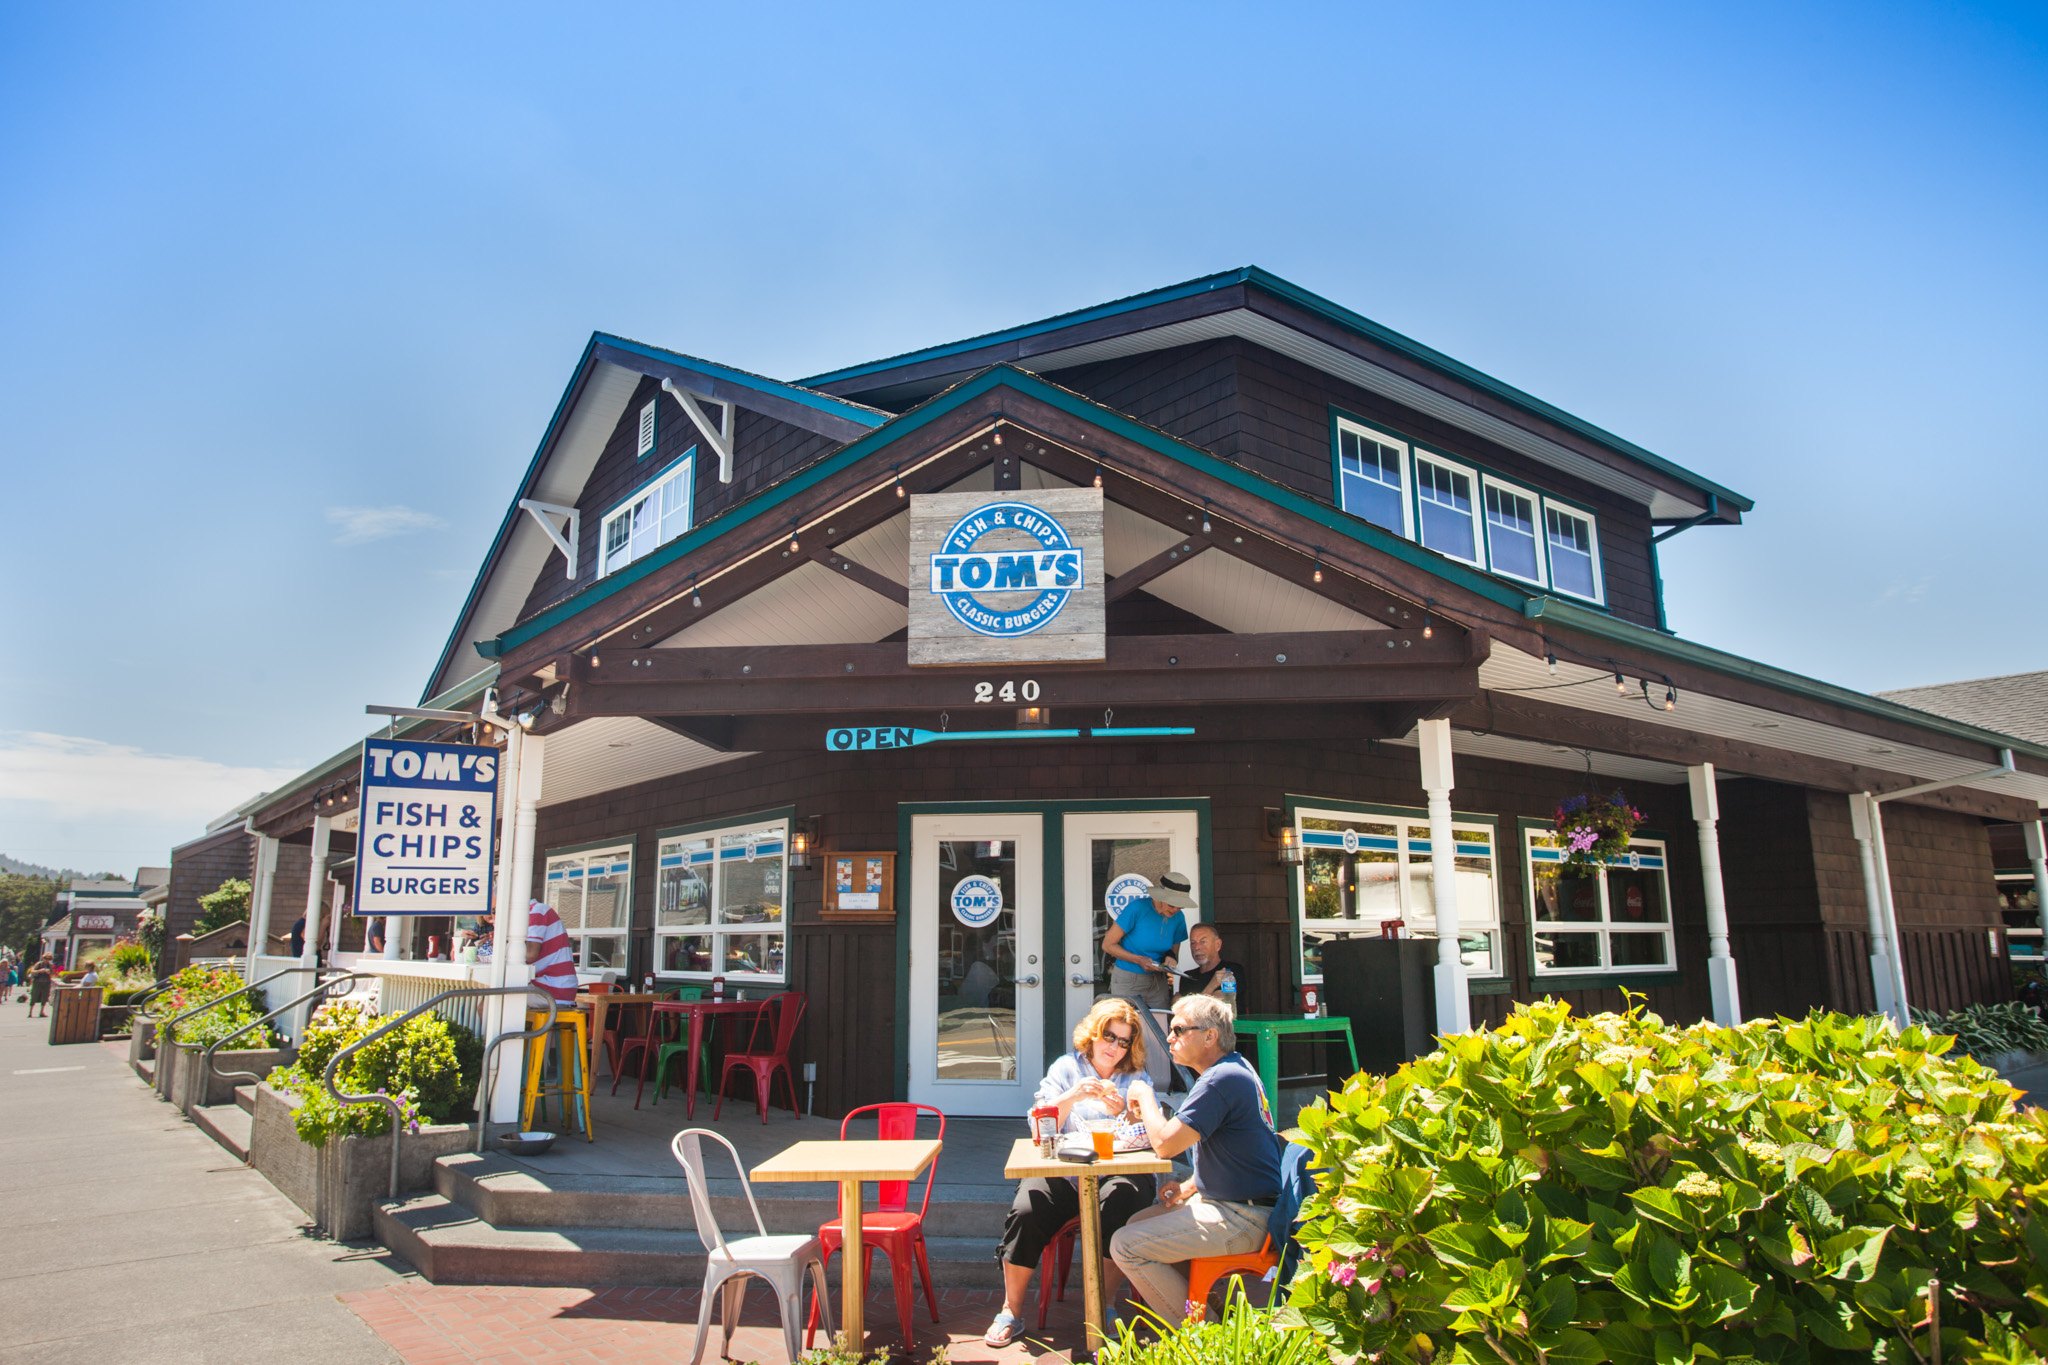 Tom’s Fish & Chips Cannon Beach